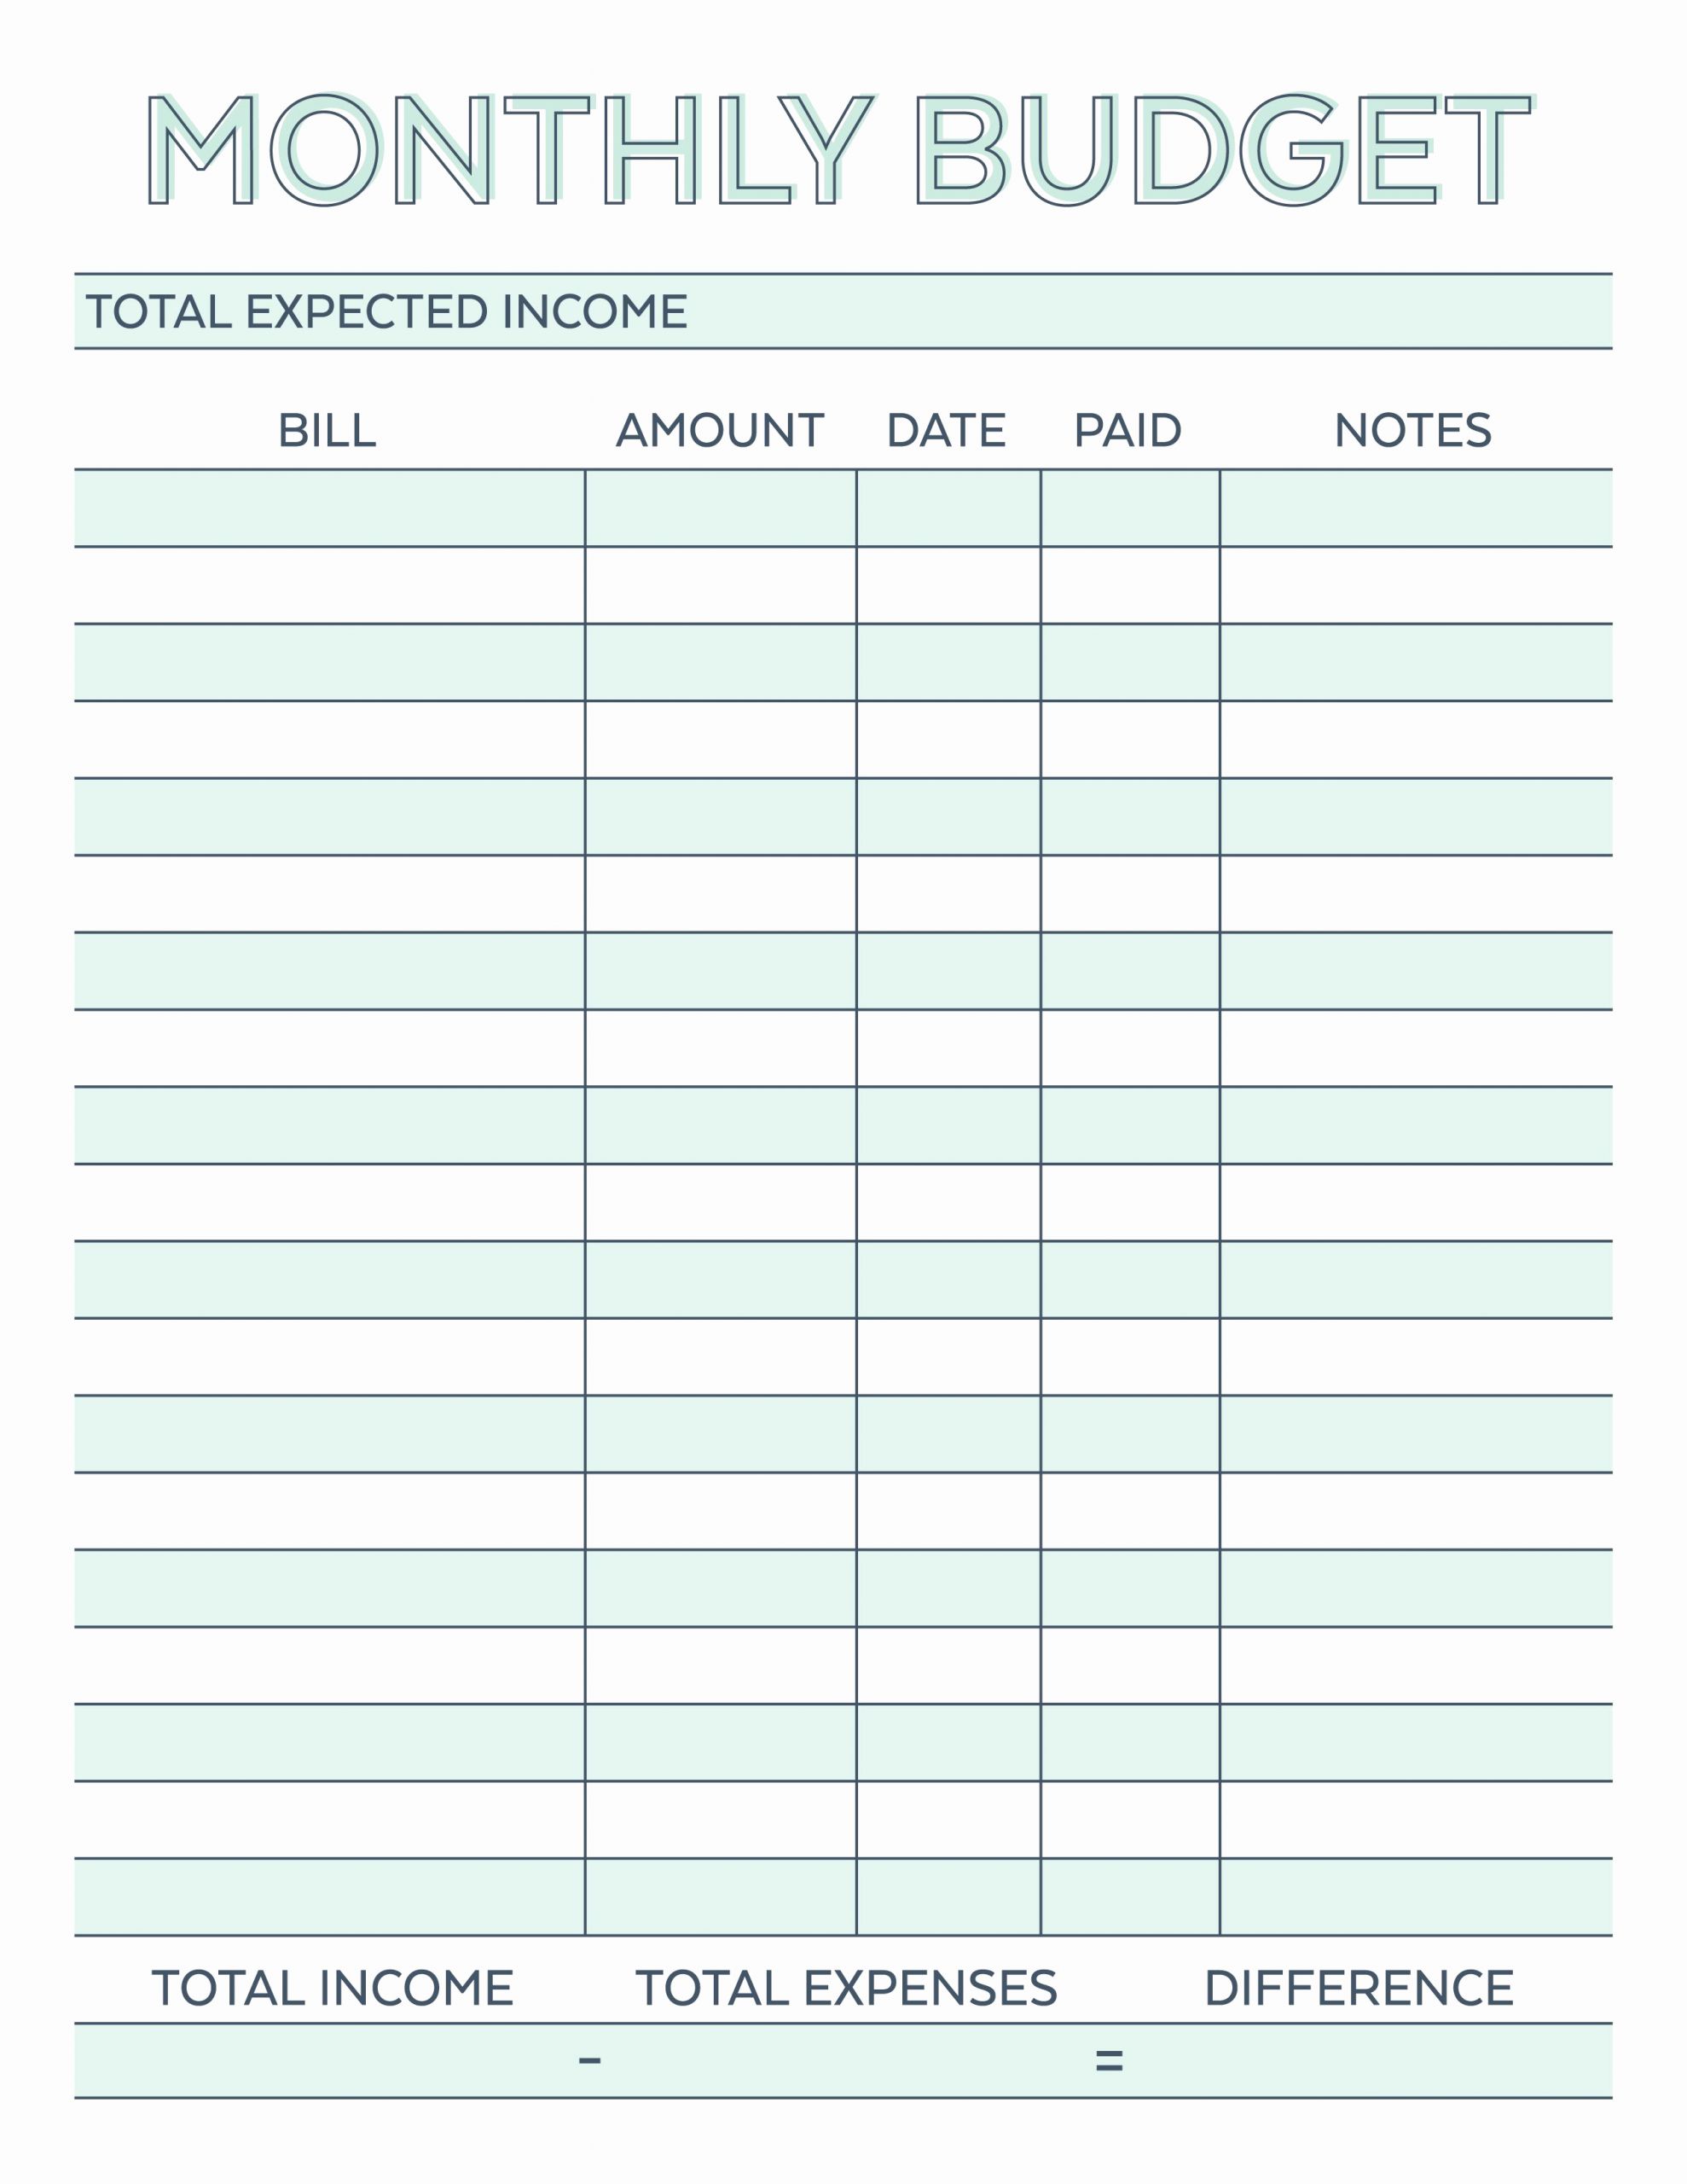 Template for Monthly Budget Unique Monthly Bud Printable 01 2 550×3 300 Pixels